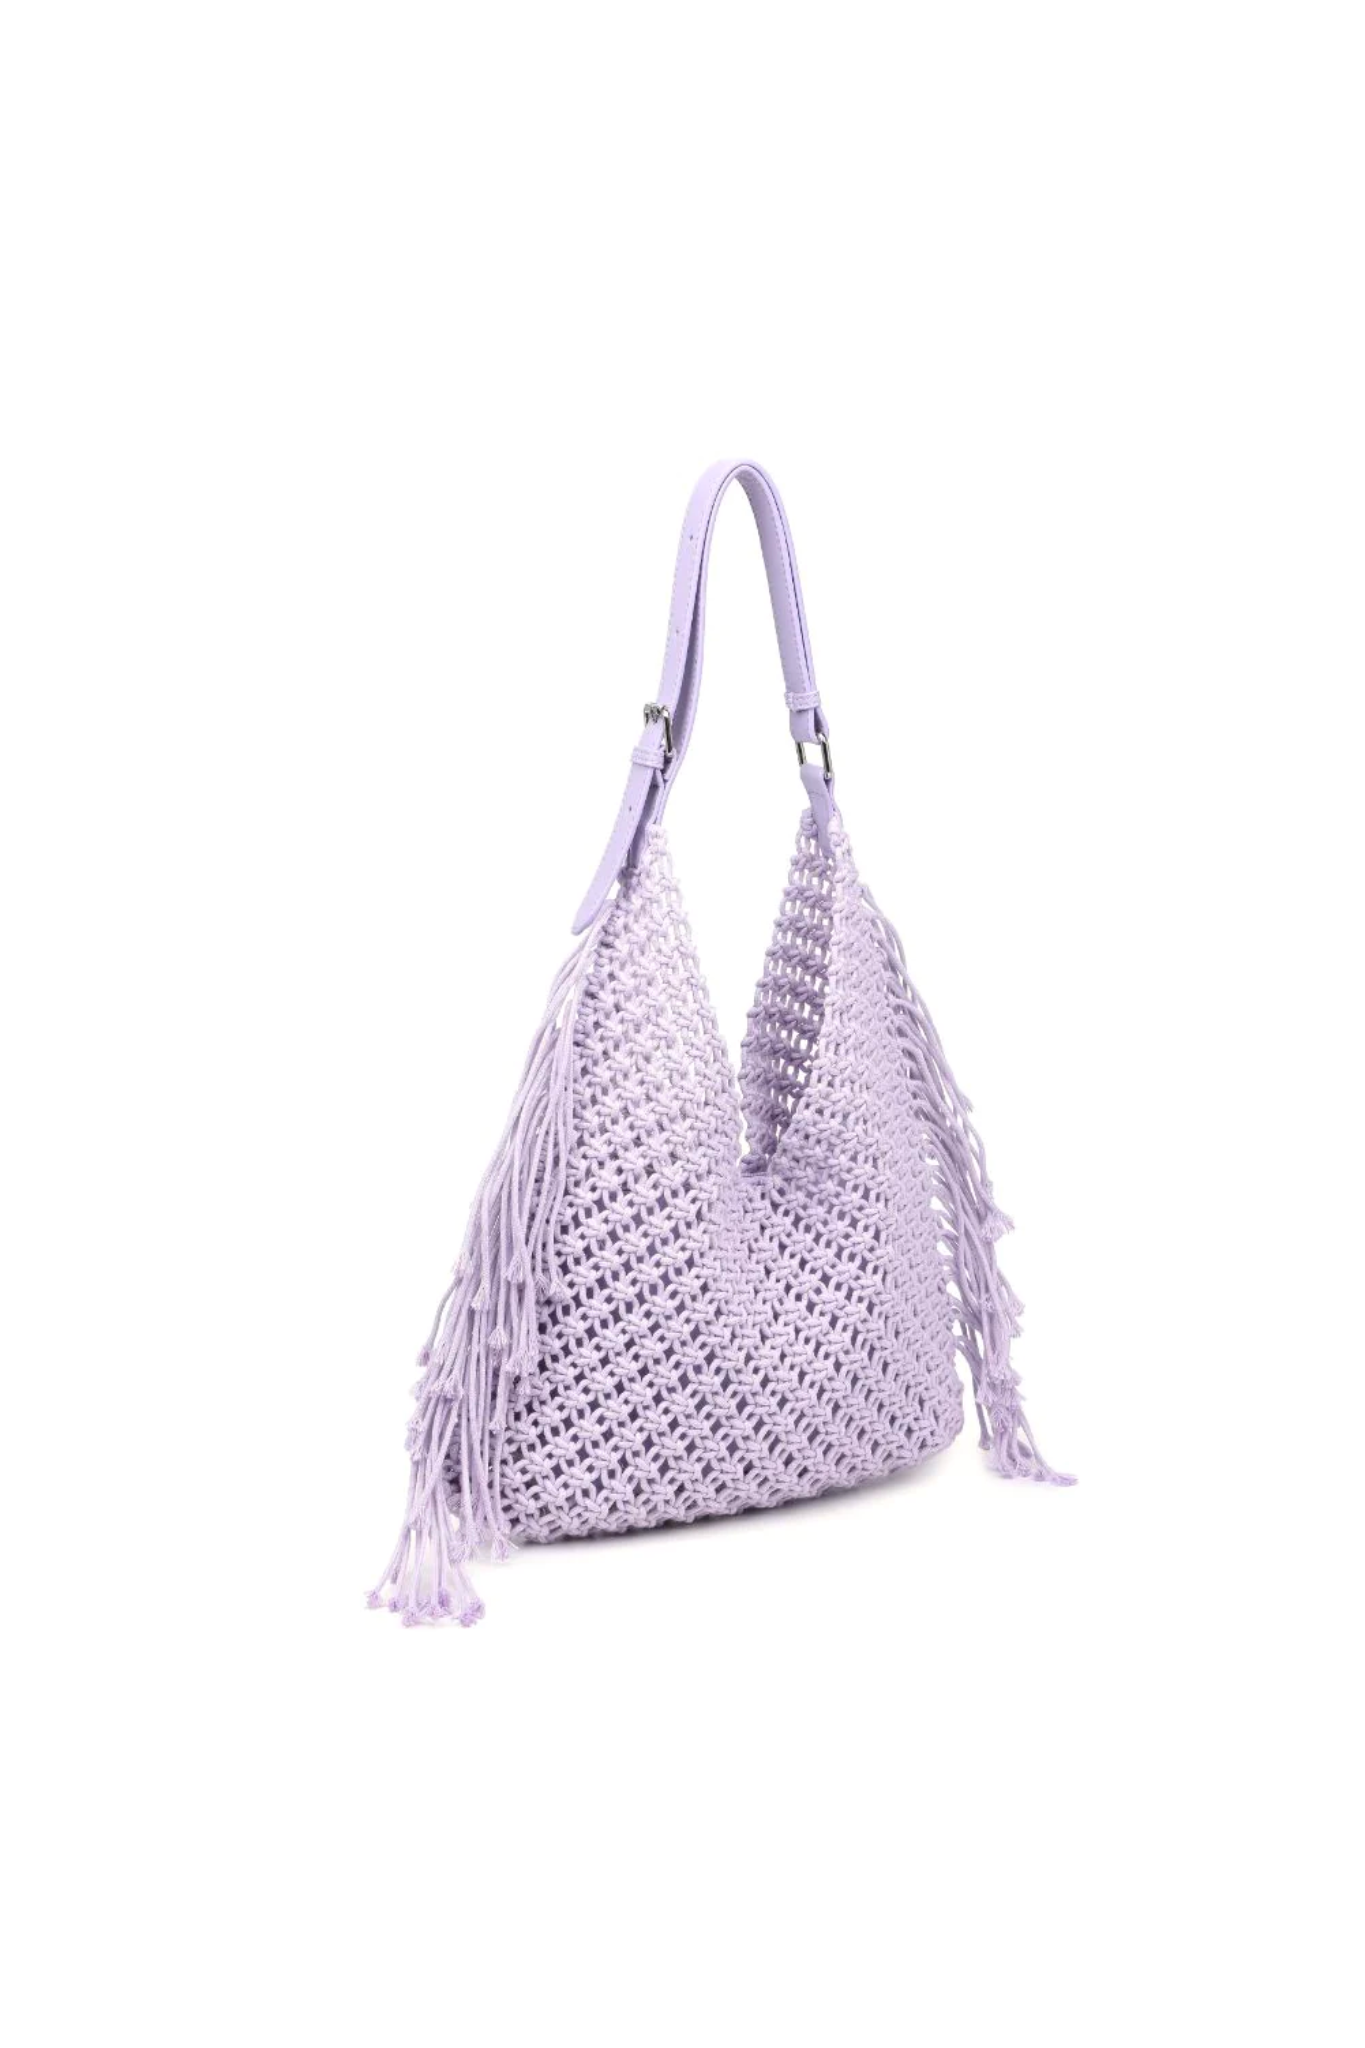 View 2 of Ariel Crochet Hobo Bag in Lilac, a Bags from Larrea Cove. Detail: .